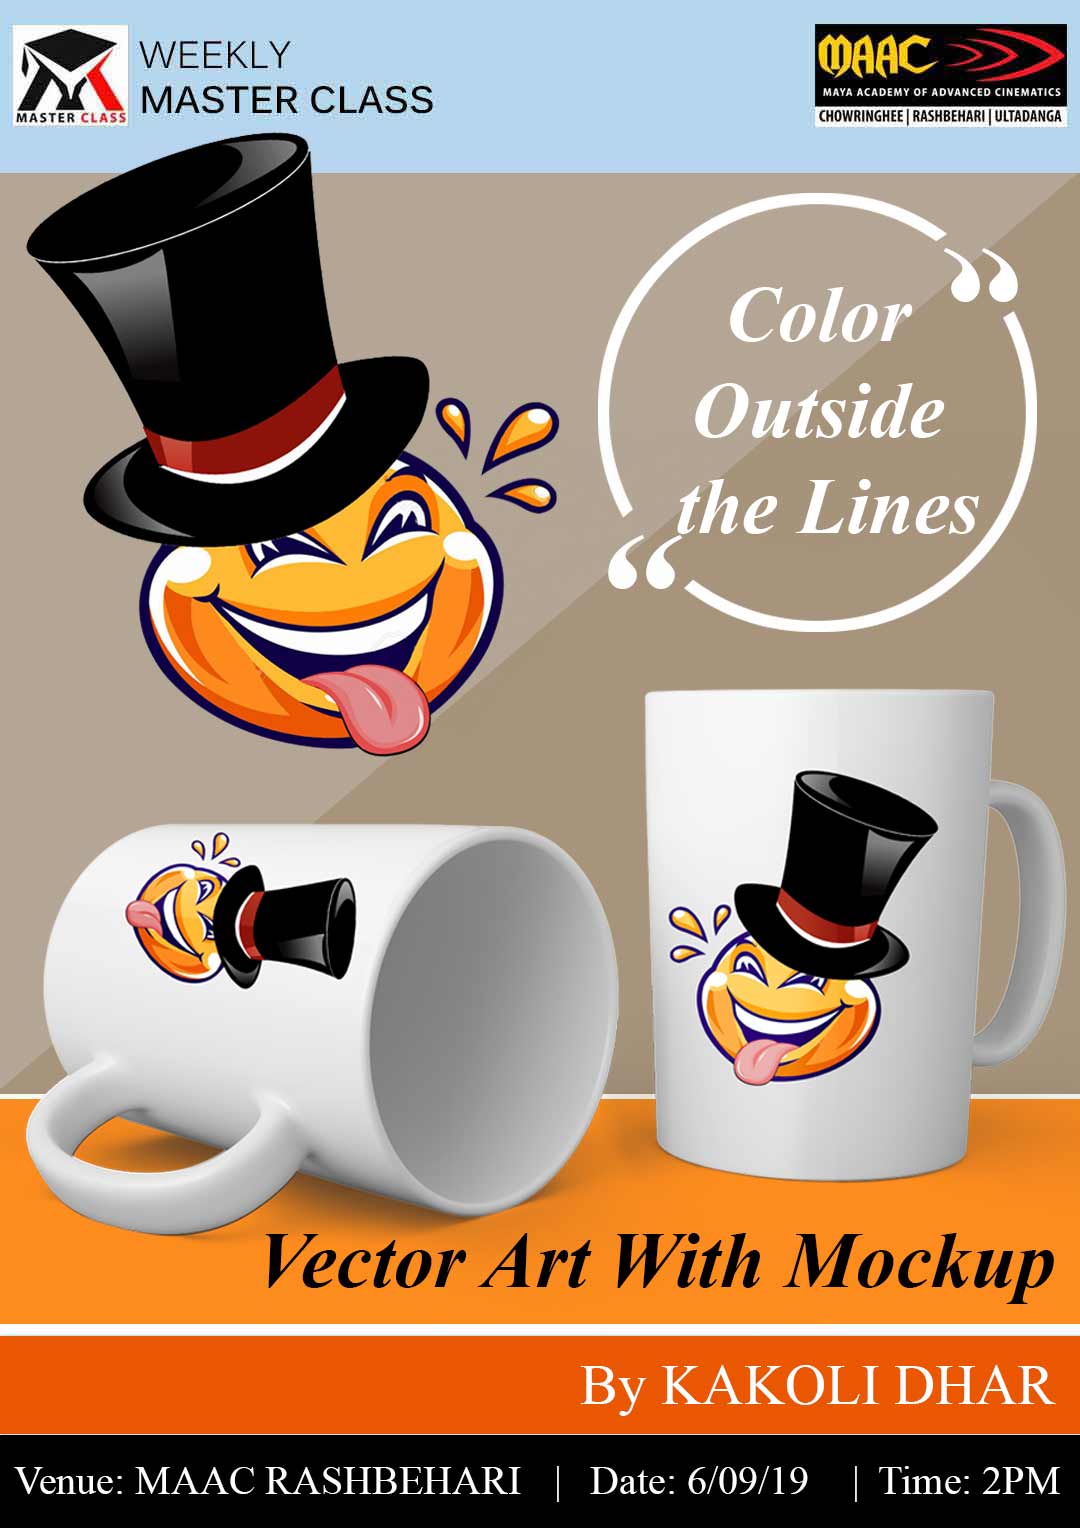 Weekly Master Class on Vector Art with Mockup